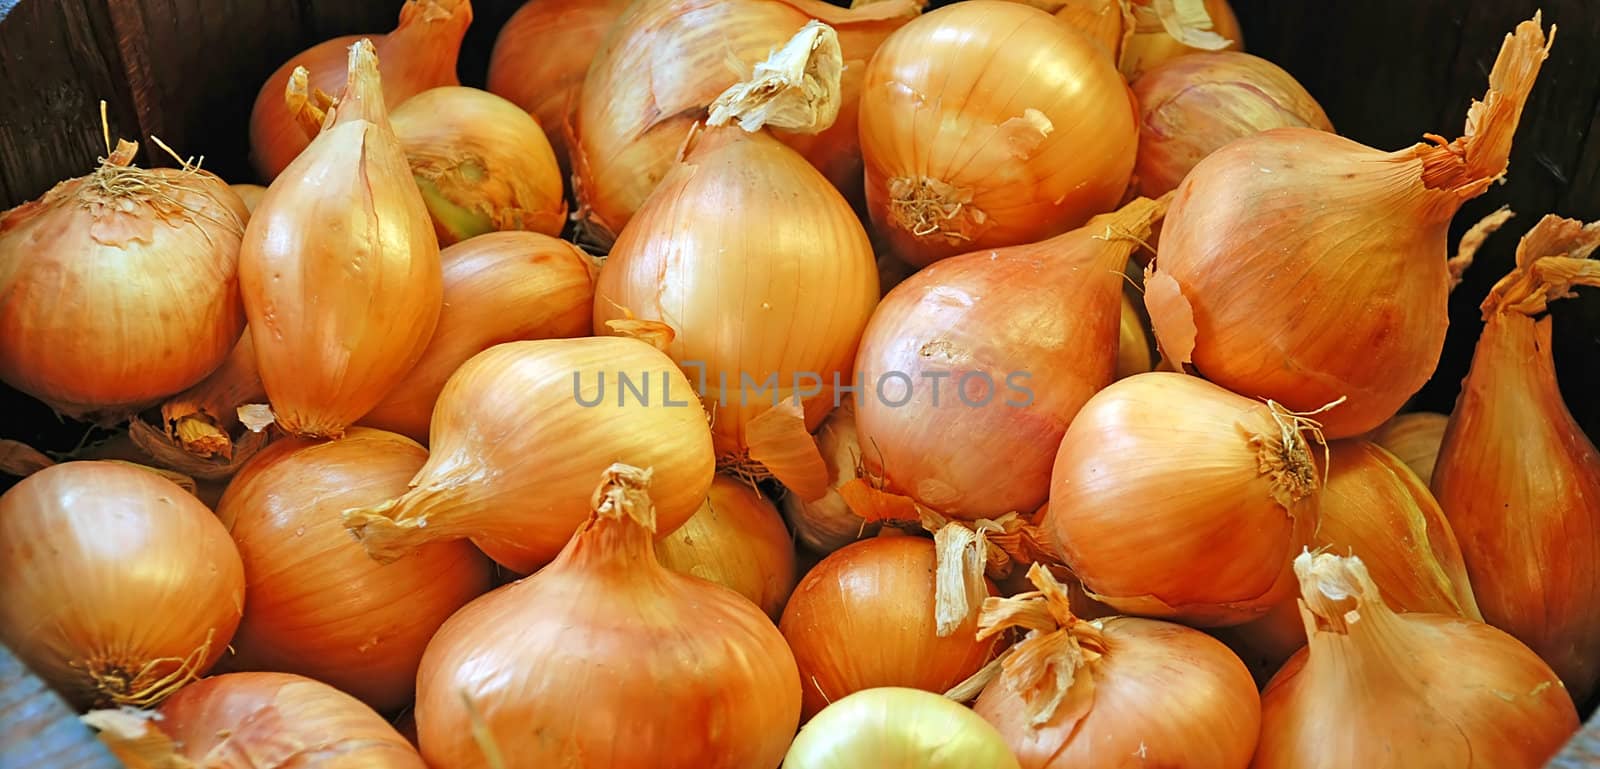 Orange Onions Background by simply